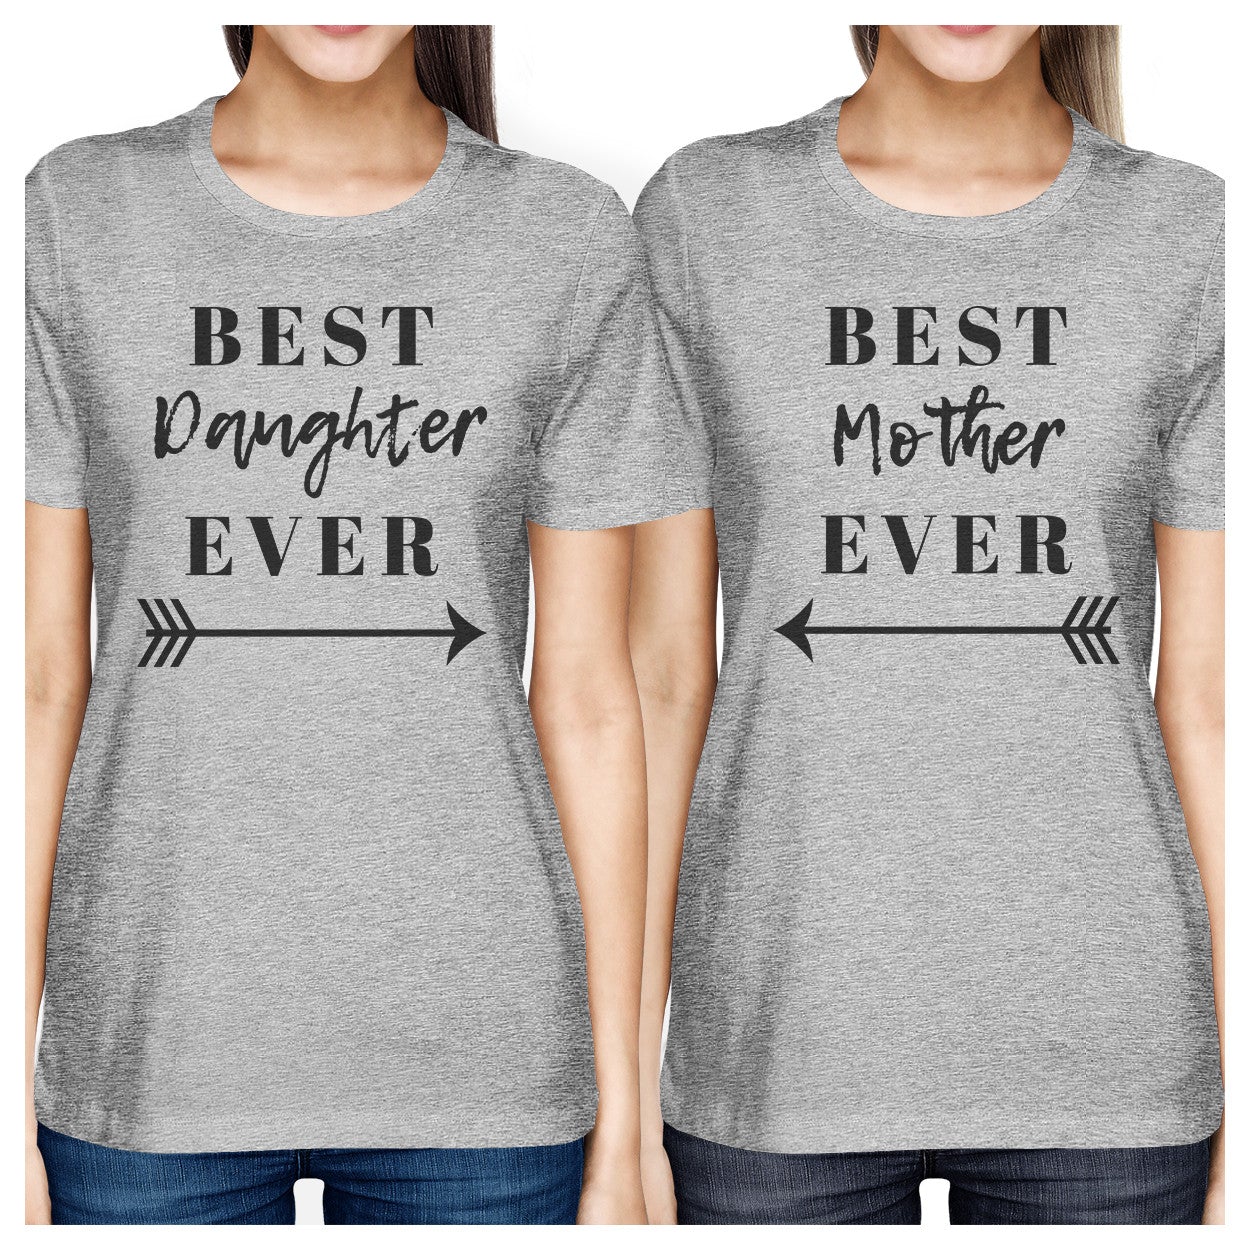 Best Daughter & Mother Ever Gray Graphic Tops For Mom And Daughter - 365 In Love